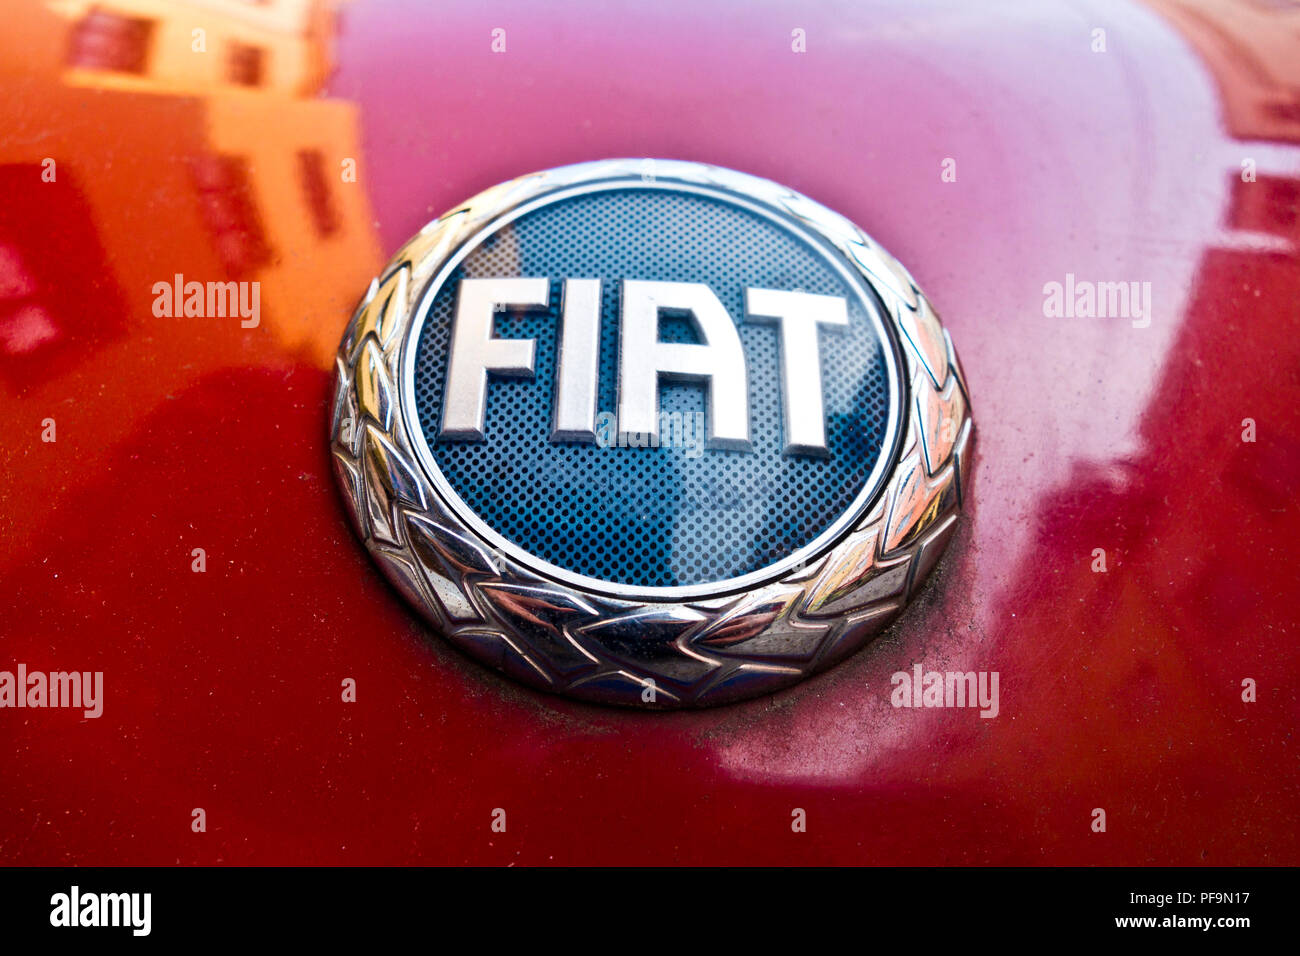 Fiat logo on a red car Stock Photo